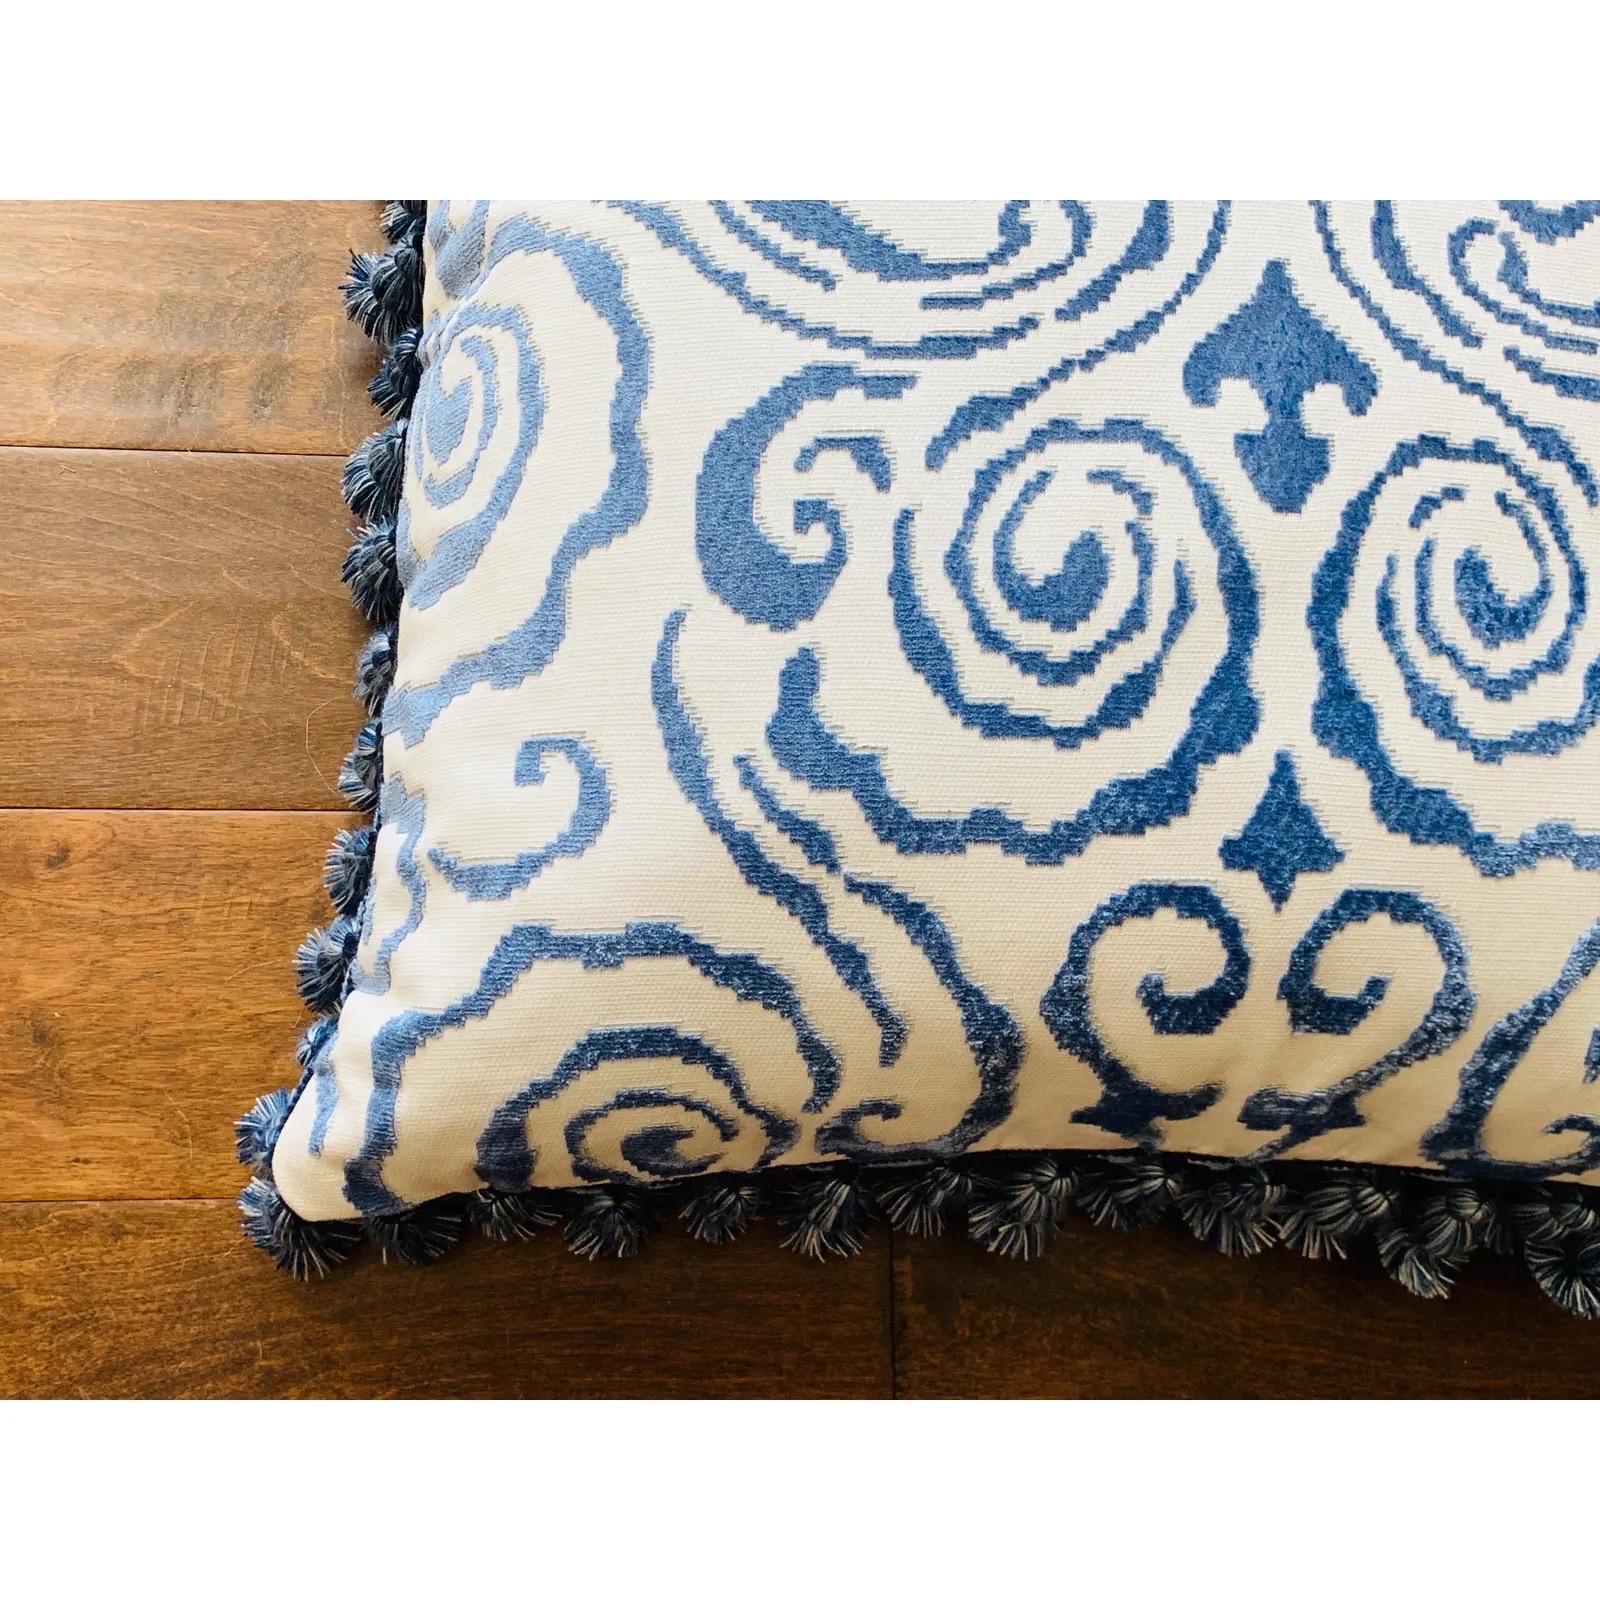 Hand-Crafted Scalamandré 'Cirrus Velvet Damask' White and Blue Pillows With Fringe, Pair For Sale